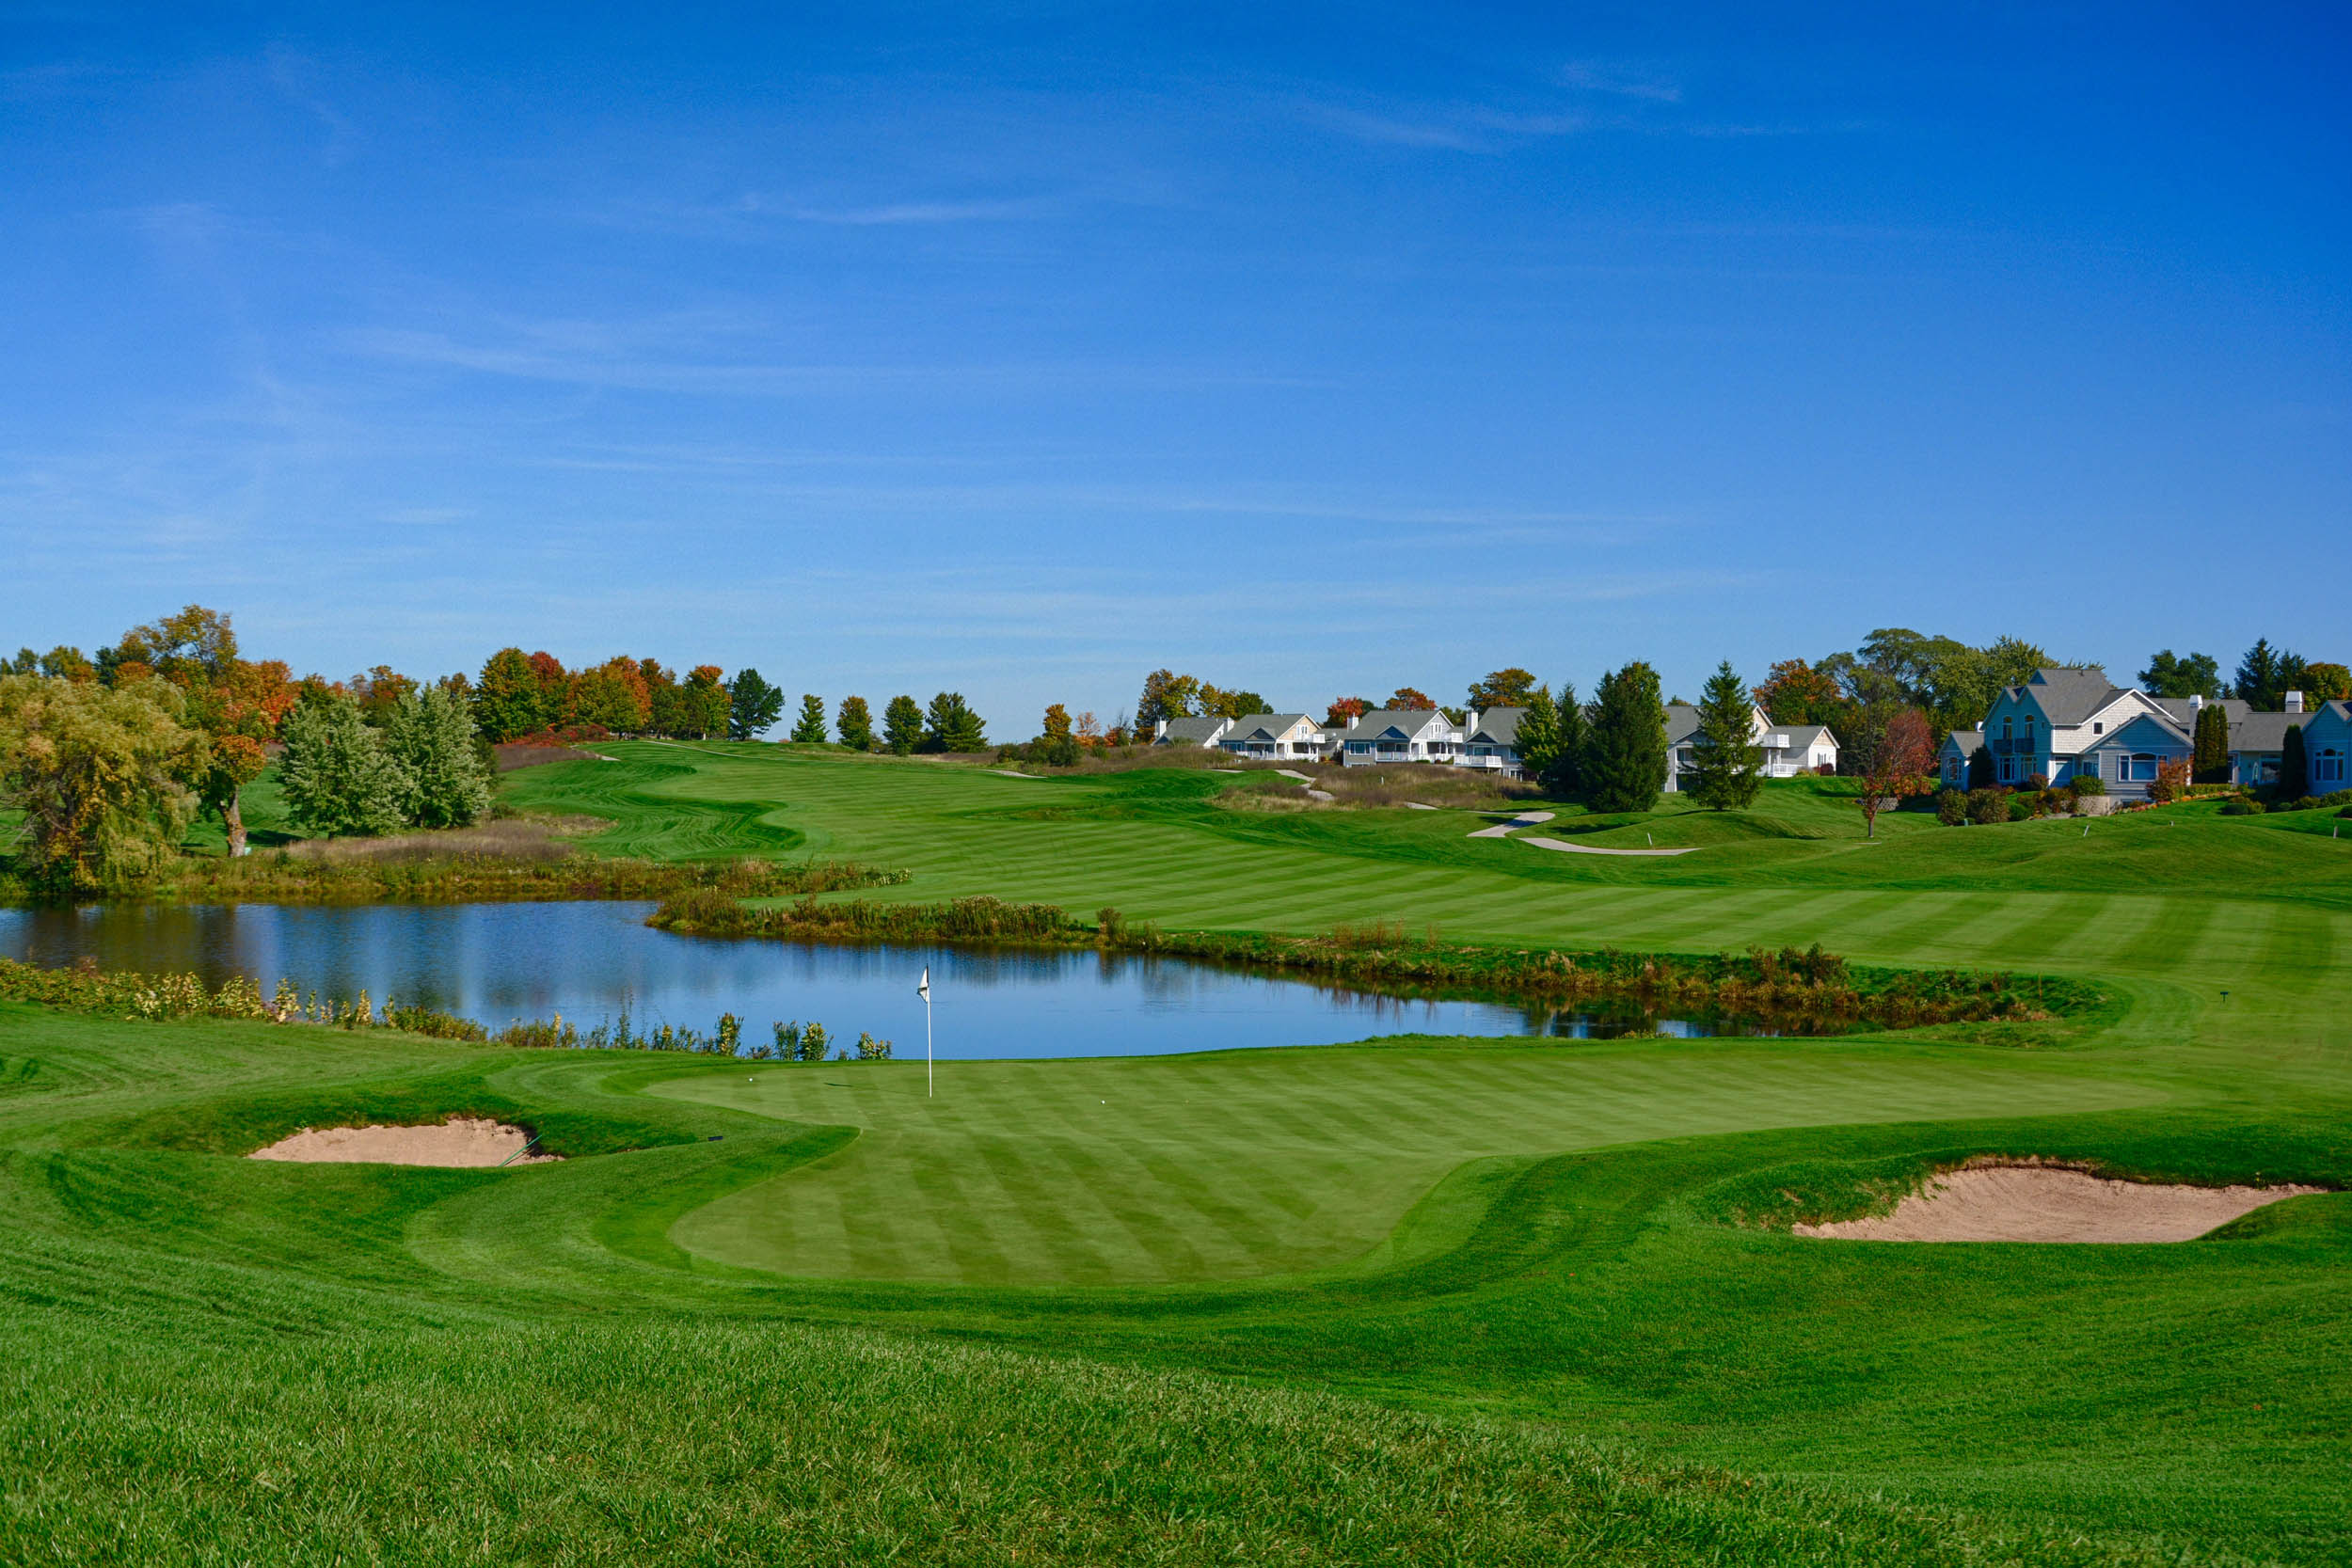 The Beat at Grand Traverse Resort: A Challenging Michigan Golf Course